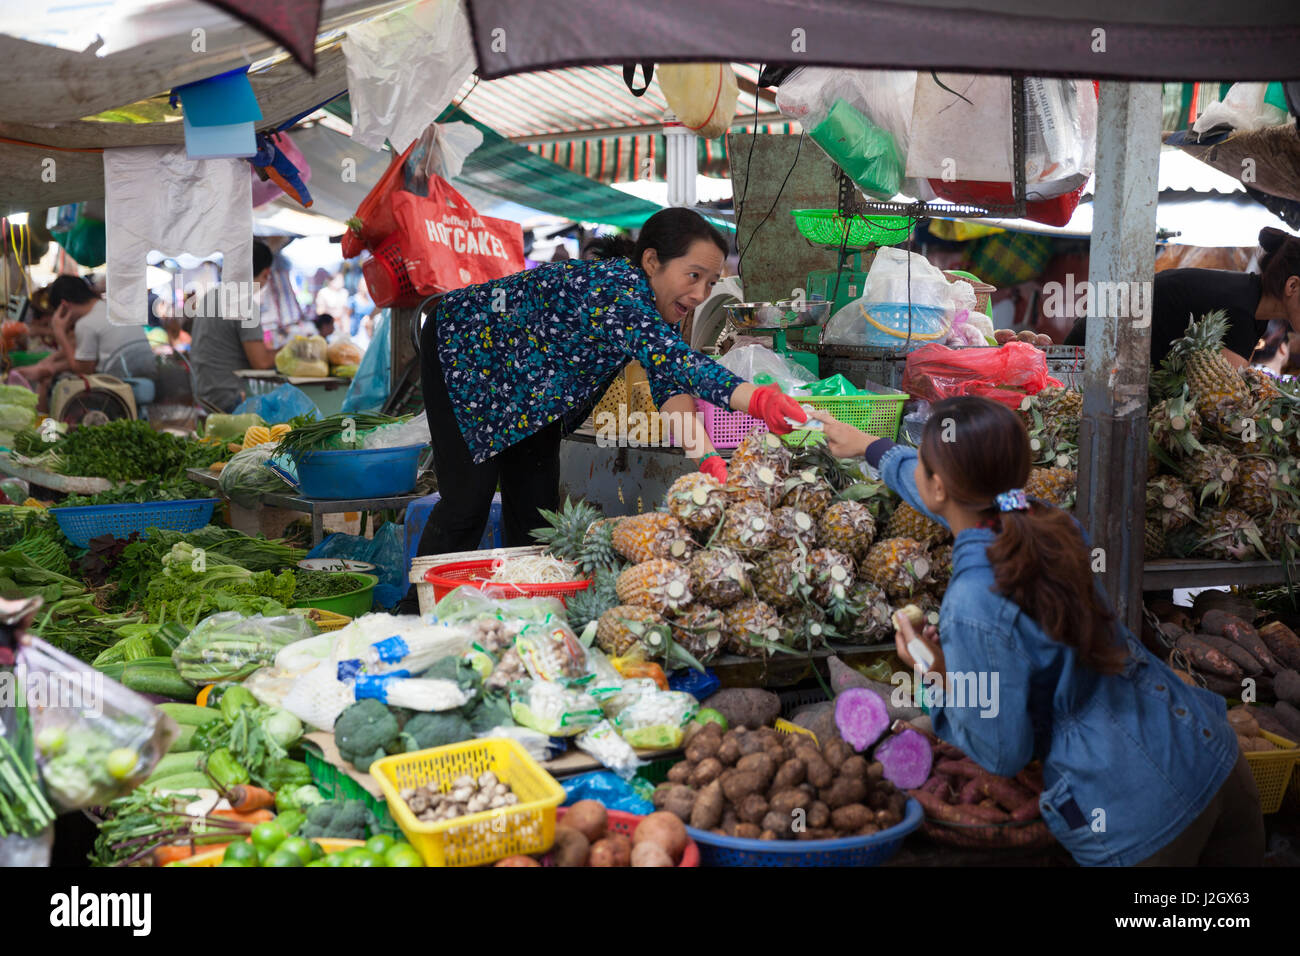 HO CHI MINH CITY, VIETNAM - NOVEMBER 21: Vietnamese woman is selling fruits and vegetables at the wet market on November 21, 2015 in Ho Chi Minh City, Stock Photo